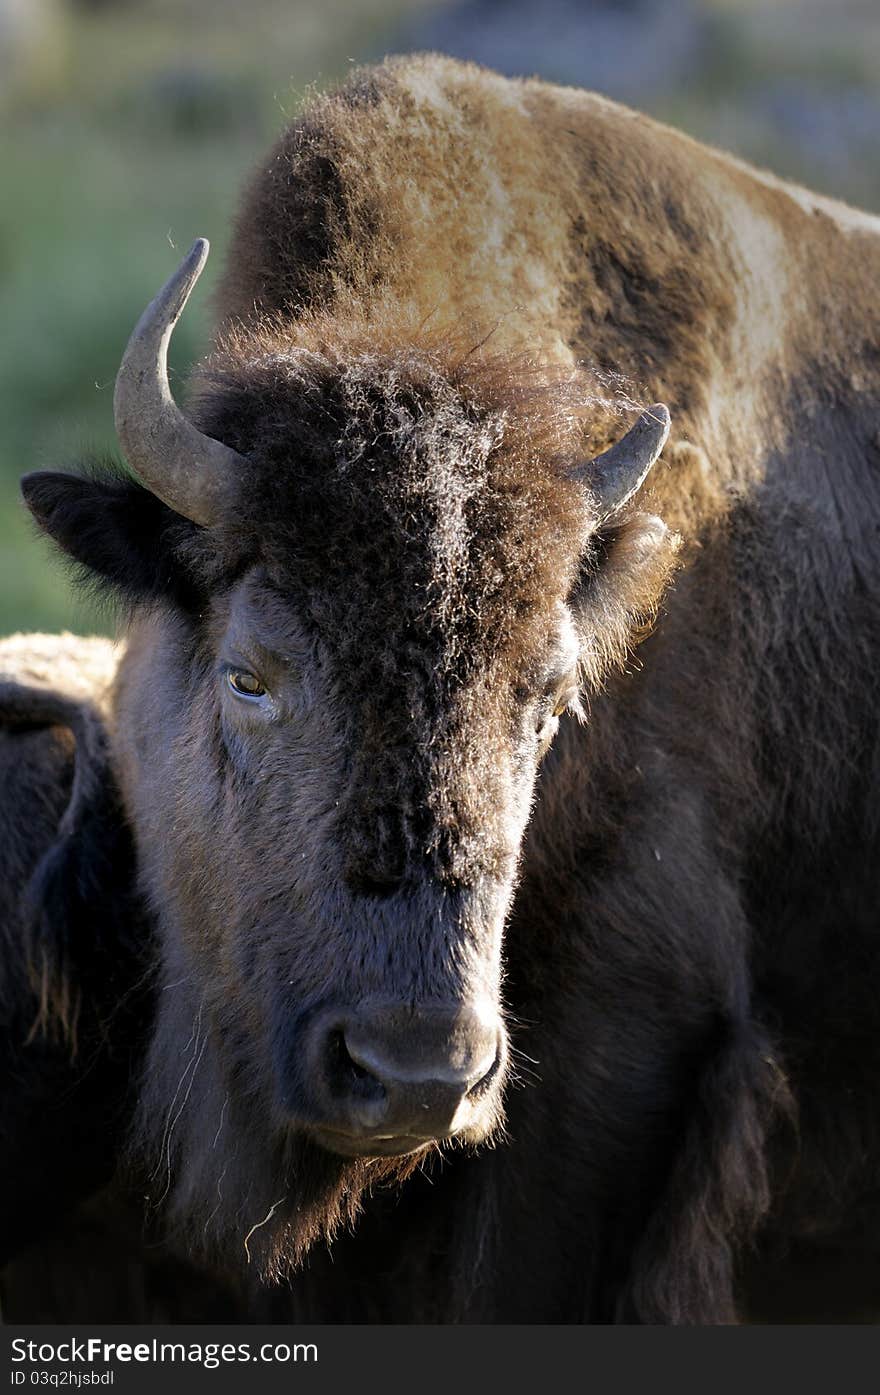 The bison herd in Yellowstone National park is the largest & old population of bison in the United States. The bison herd in Yellowstone National park is the largest & old population of bison in the United States.